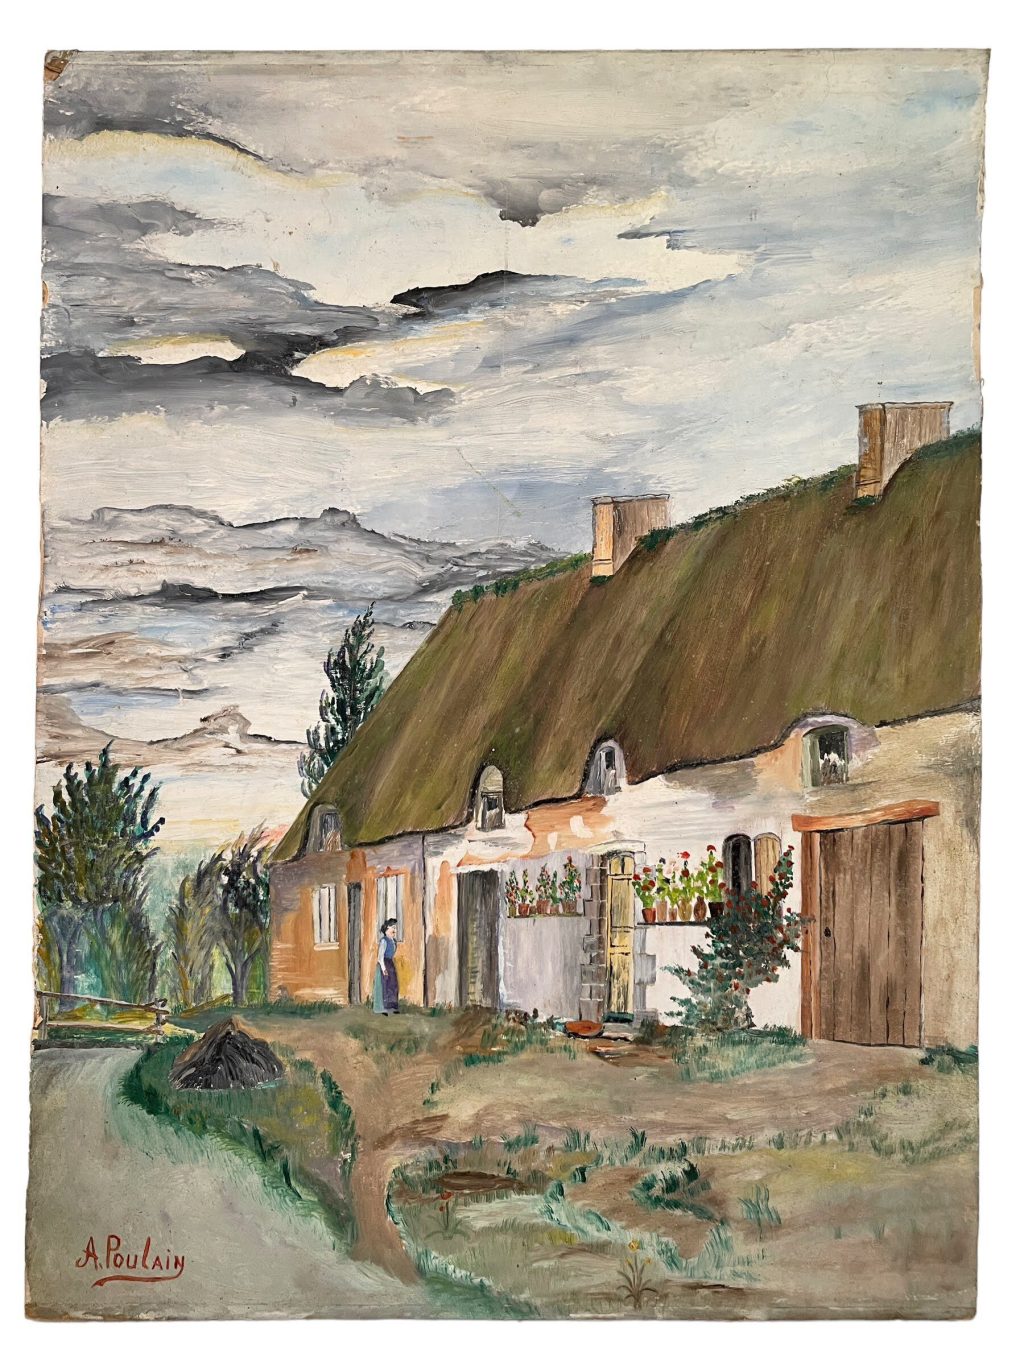 Vintage French Cottage Acrylic Painting On Board By A Poulain Traditional Brittany Cottage Building circa 1960-70’s